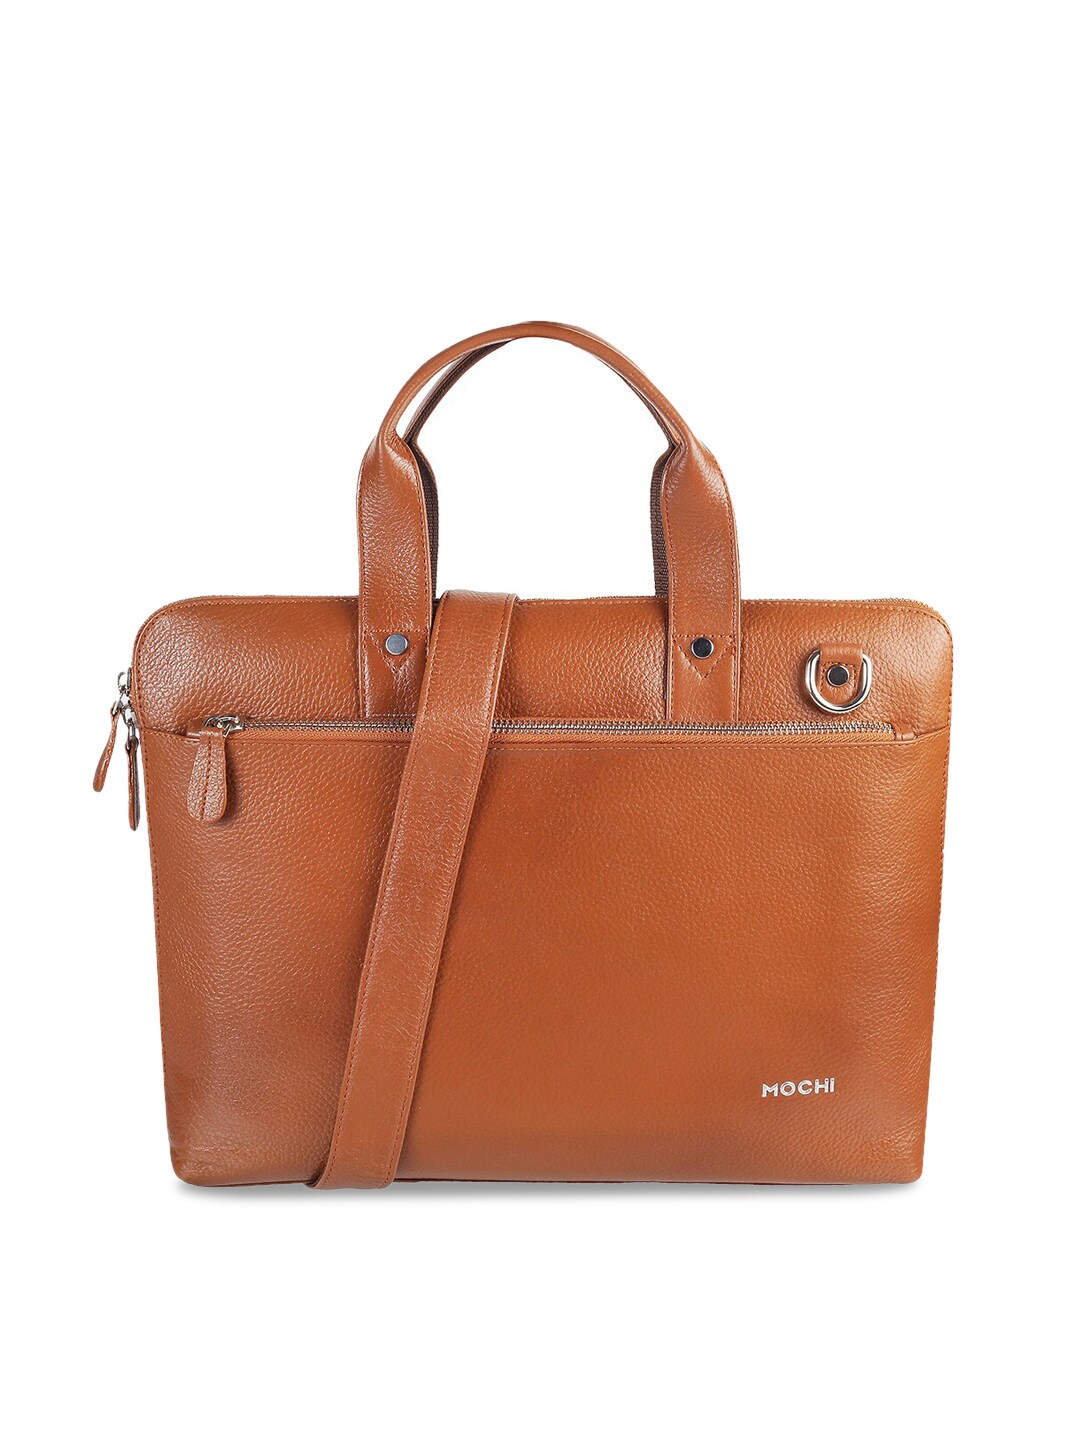 Mochi Tan Brown Leather Structured Handheld Bag Price in India